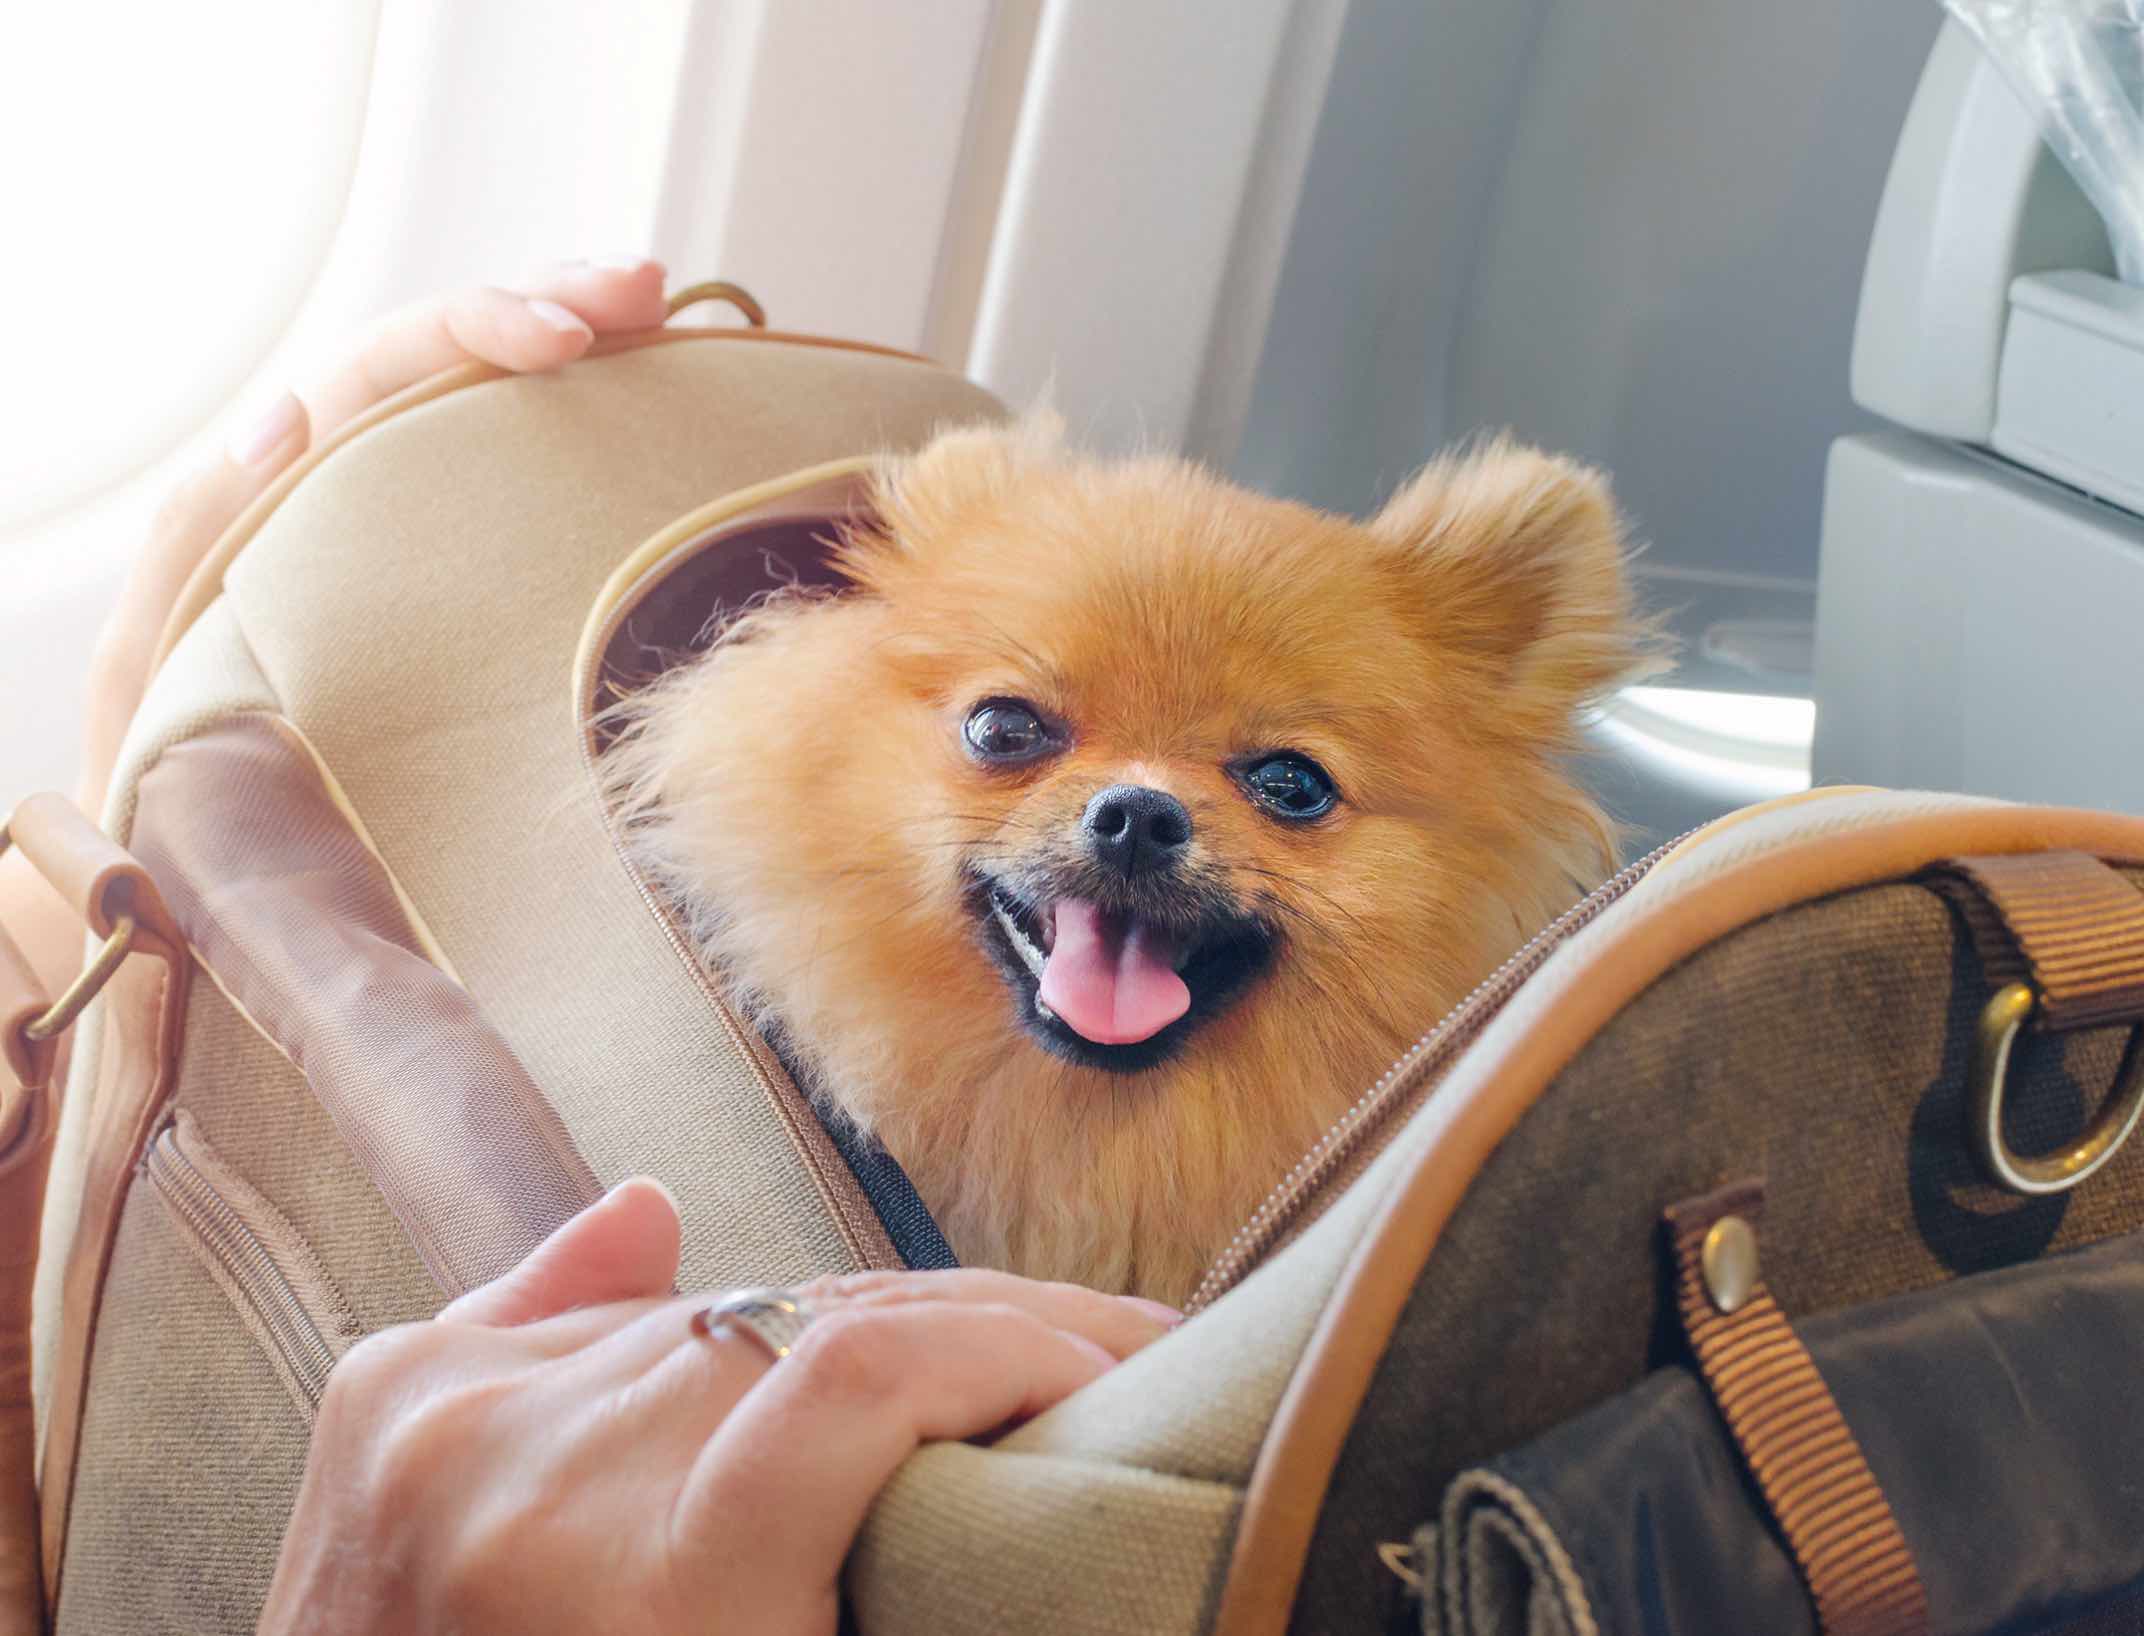 This cute dog is ready for a plane ride thanks to tips with Dog Training Elite in Orlando.